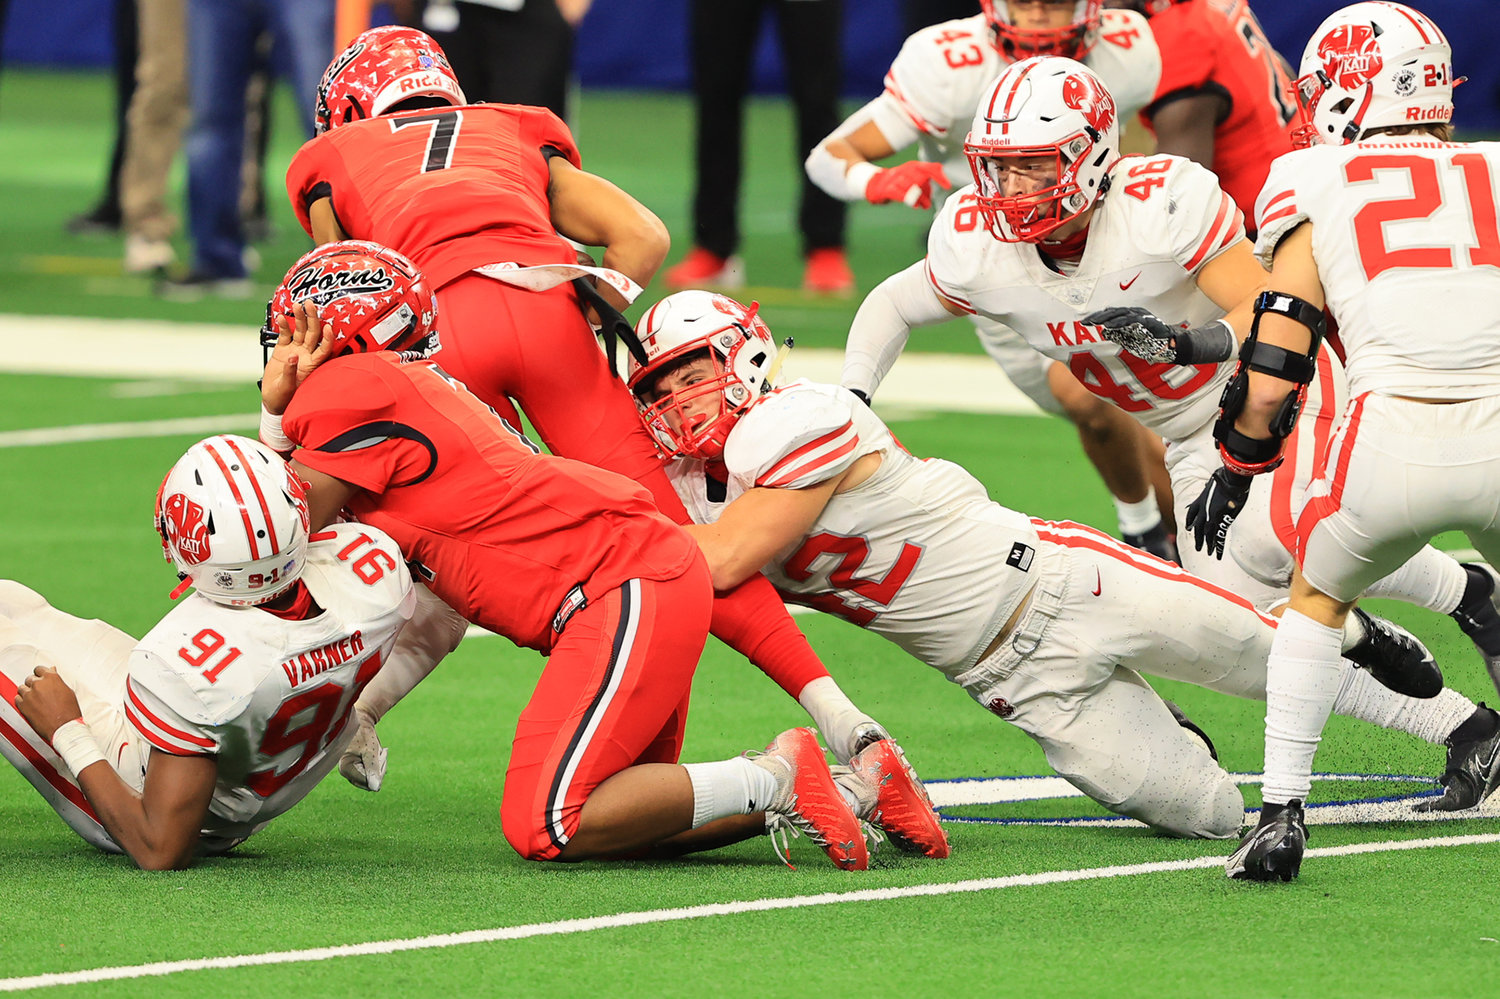 Katy junior linebacker Ty Kana (42) brings down Cedar Hill quarterback Kaidon Salter during the third quarter of the Tigers' 51-14 win over Cedar Hill at AT&T Stadium on Saturday afternoon. Katy won the Class 6A-Division II state championship.